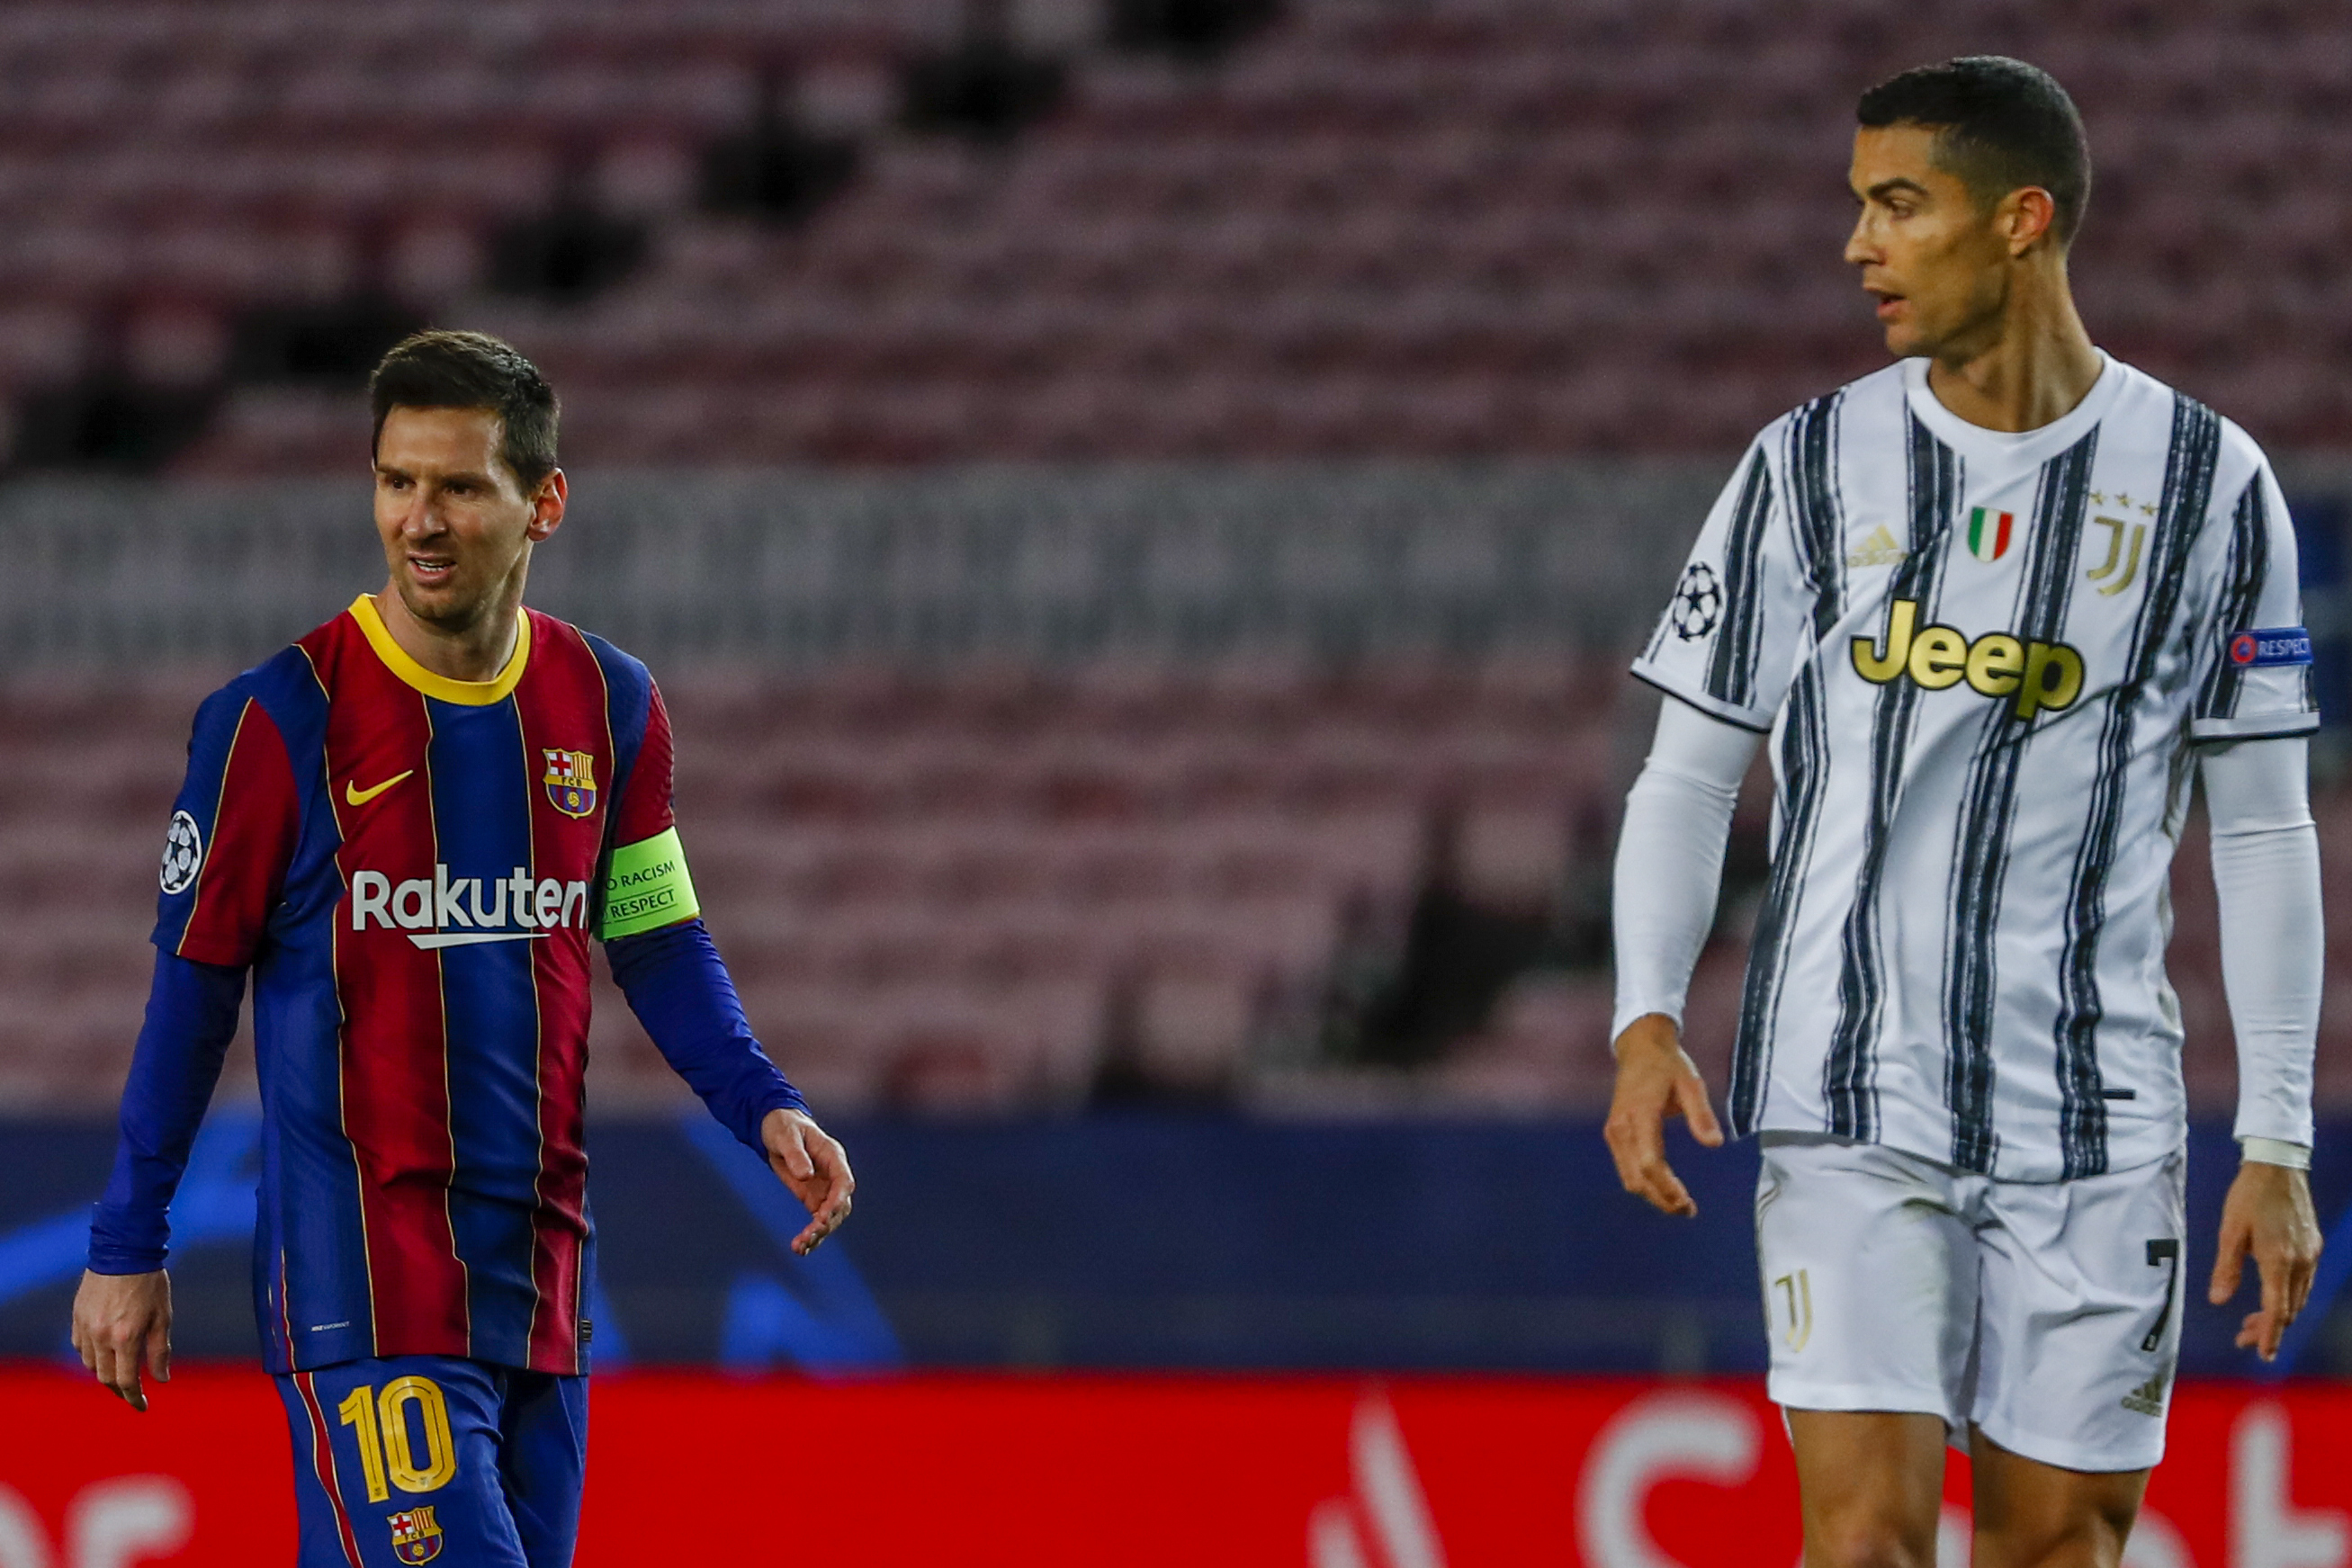 Ronaldo vs Messi tale of the tape - head-to-head record, goals, wins &  trophies as Juventus get set to play Barcelona